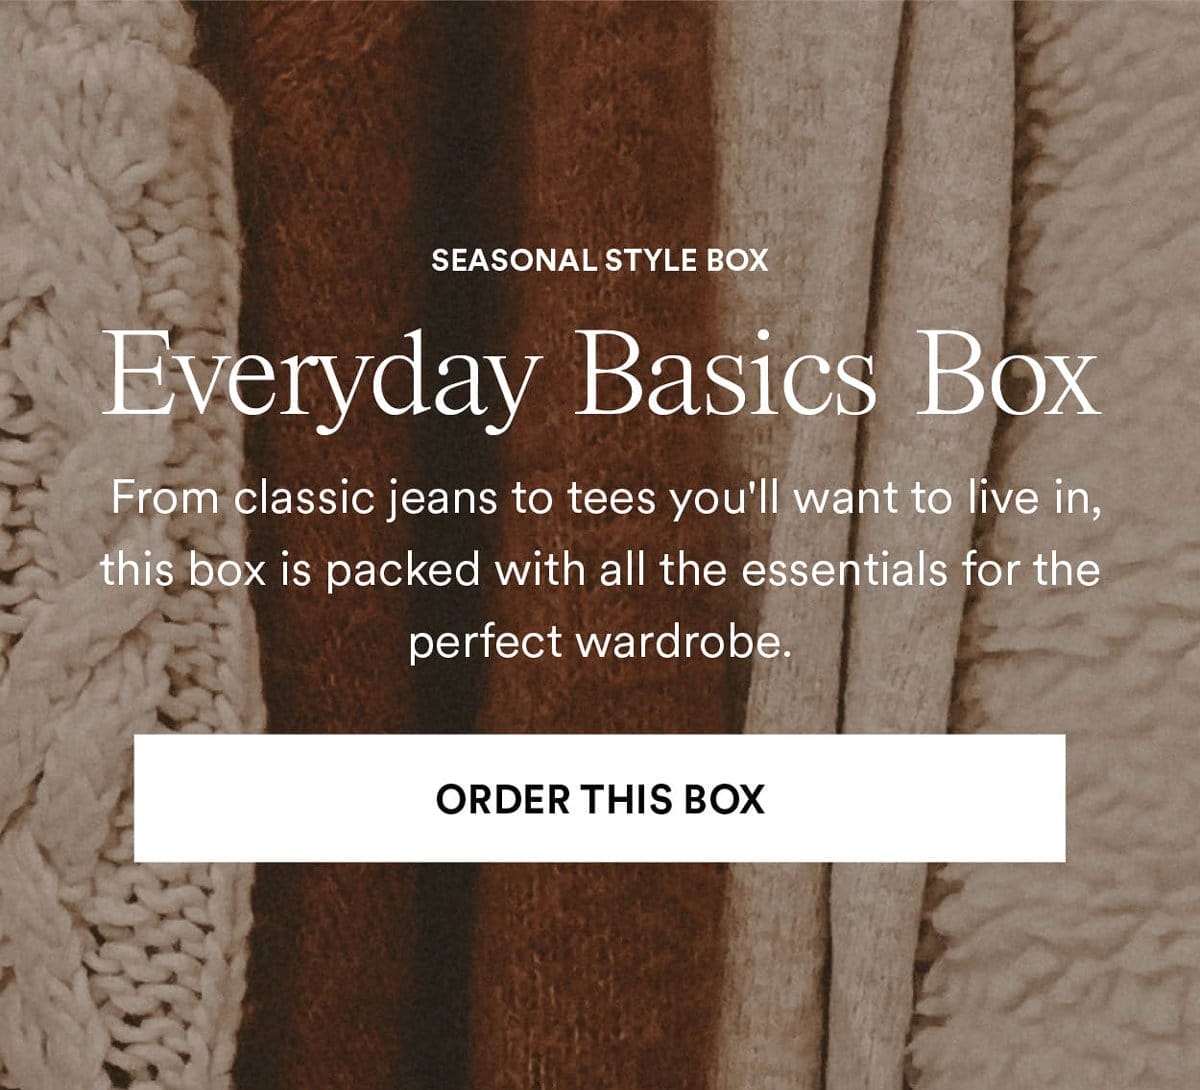 Everyday Basics Box. From jeans to tees, this box is packed with all the essentials. Order This Box